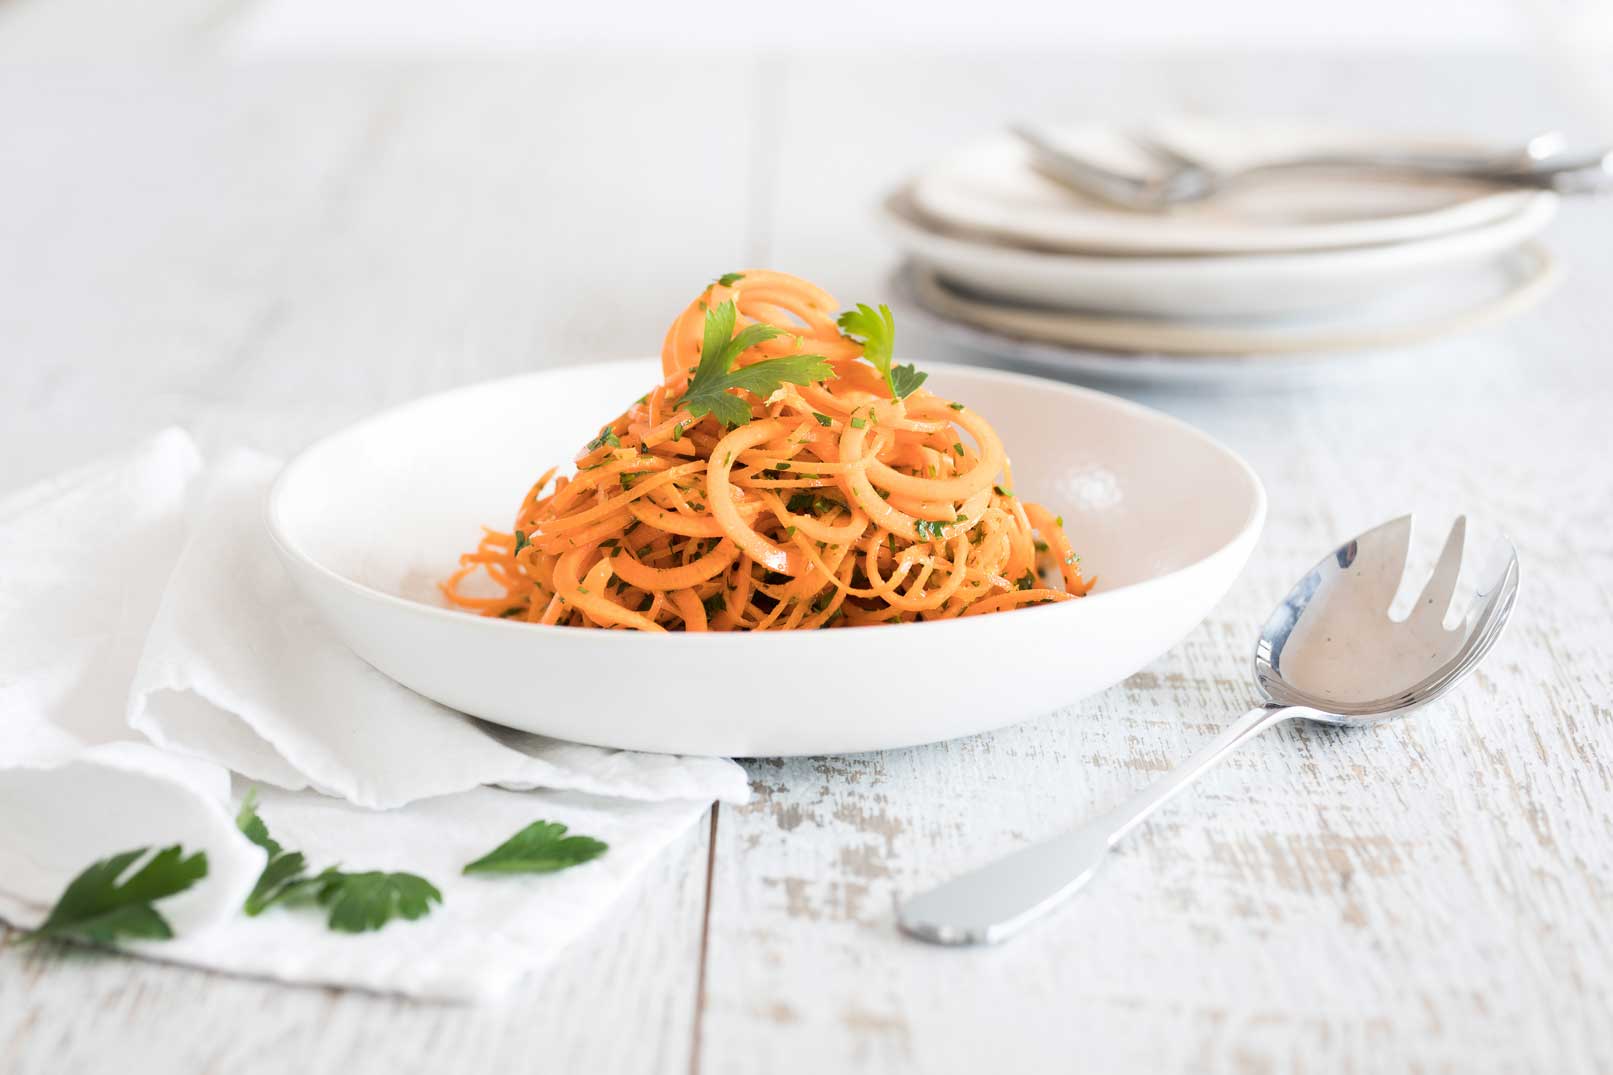 Carrot salad with orange and ginger piled in a white serving bowl with a large serving spoon and a white cloth napkin on the side with serving plates and utensils in the background.